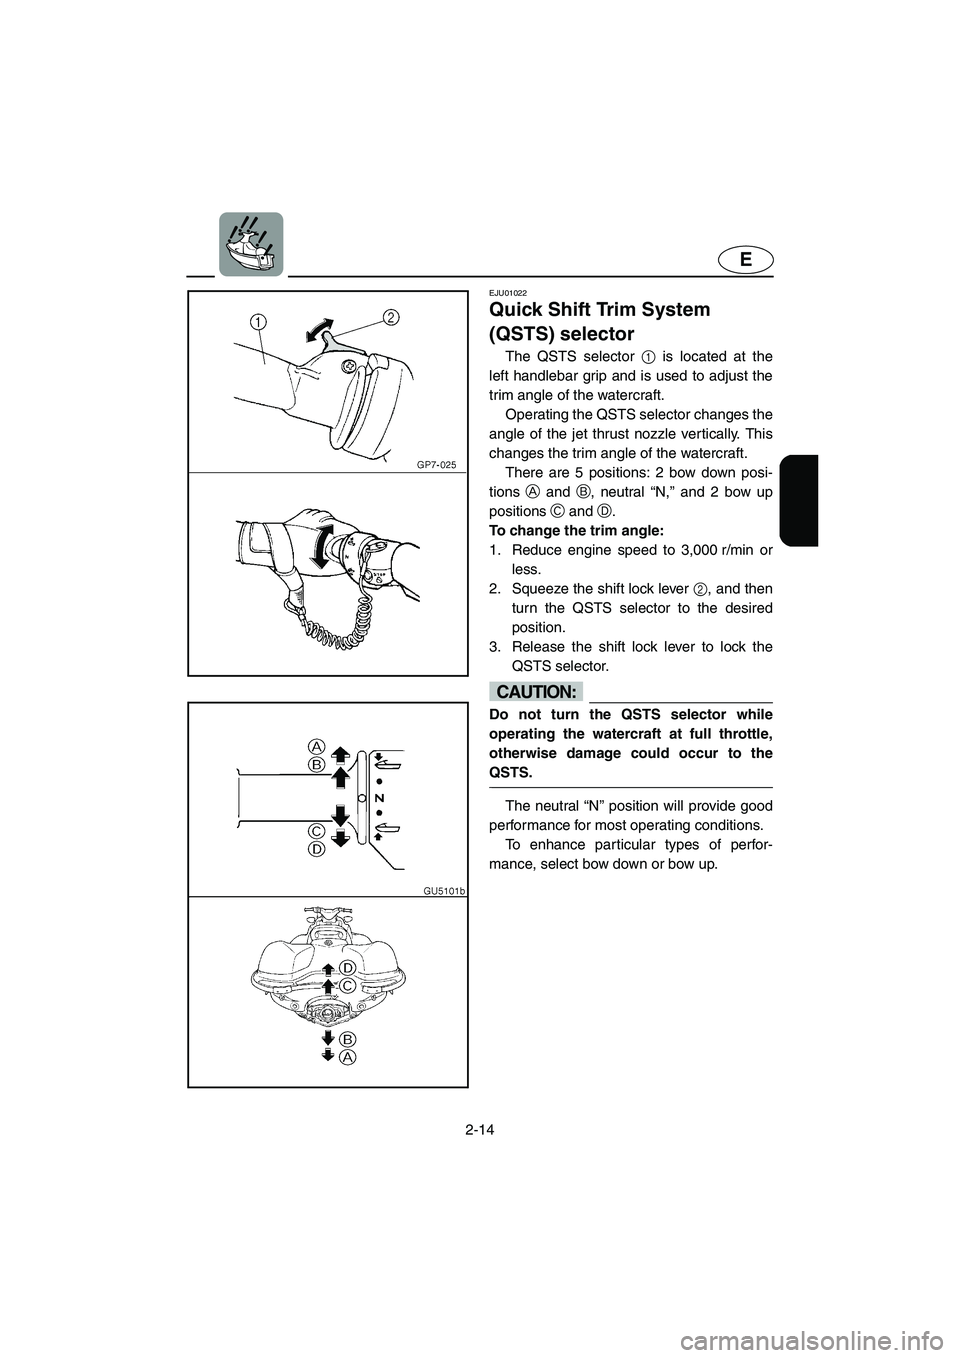 YAMAHA SUV 1200 2003 Owners Guide 2-14
E
EJU01022
Quick Shift Trim System 
(QSTS) selector 
The QSTS selector 1 is located at the
left handlebar grip and is used to adjust the
trim angle of the watercraft. 
Operating the QSTS selector